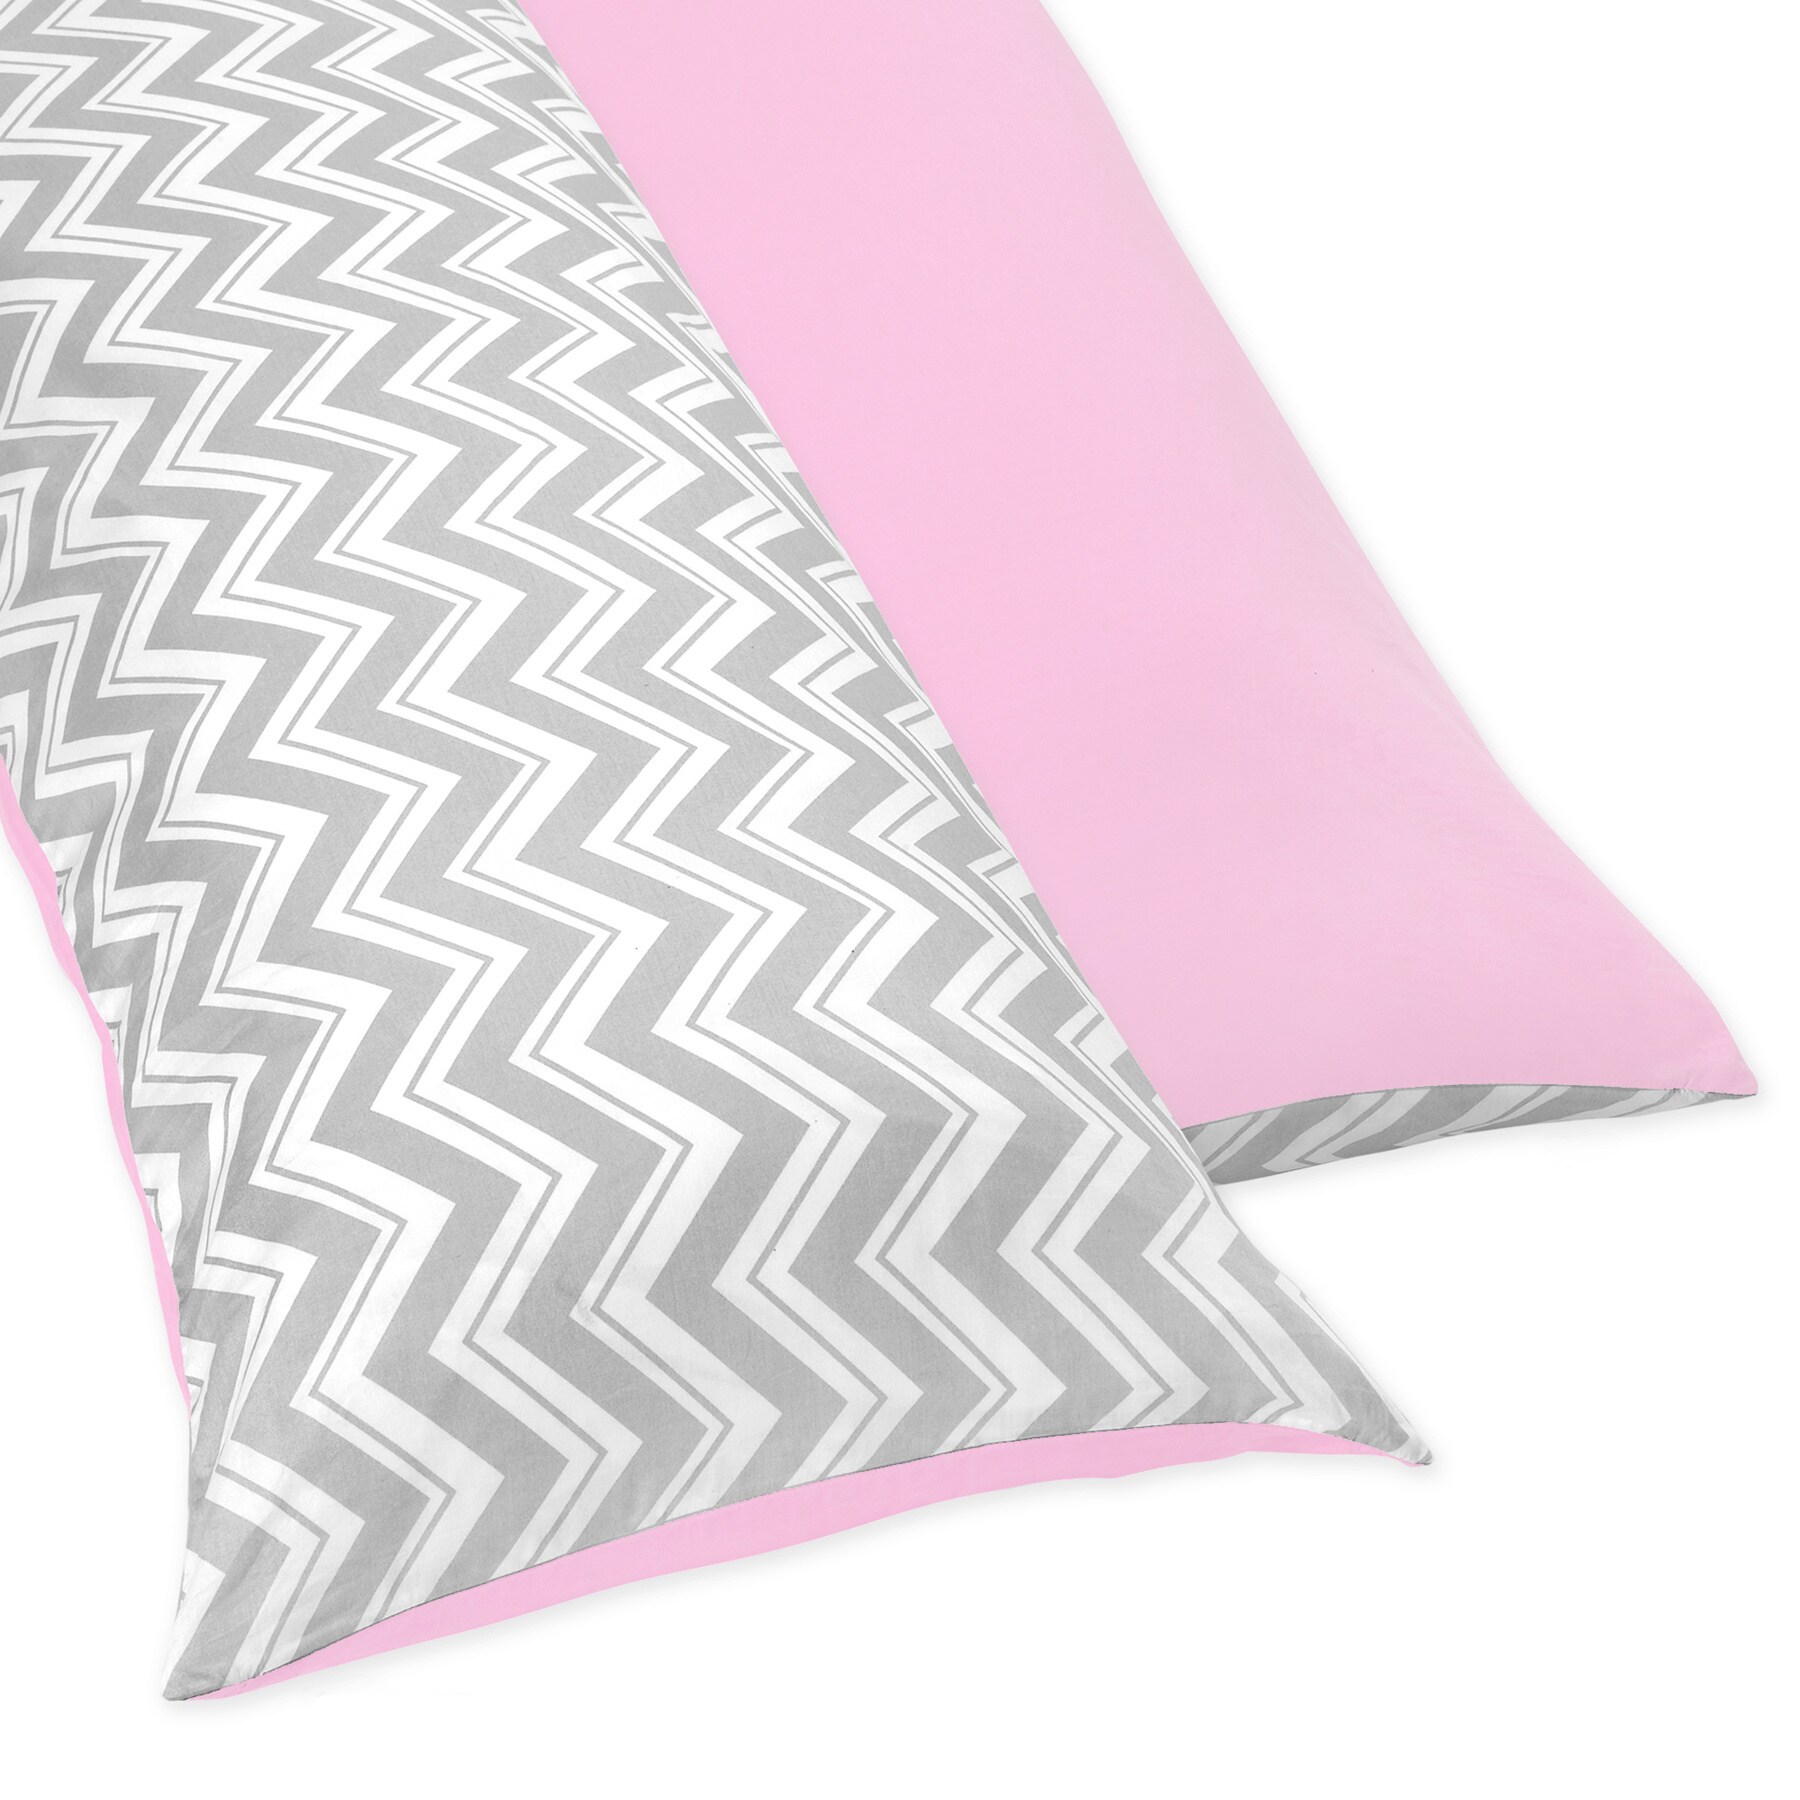 Sweet Jojo Designs Pink And Gray Chevron Full Length Double Zippered Body Pillow Case Cover (Pink/ grey/ whiteThread count 200Materials 100 percent cottonCare instructions Machine wash and dryThe digital images we display have the most accurate color p